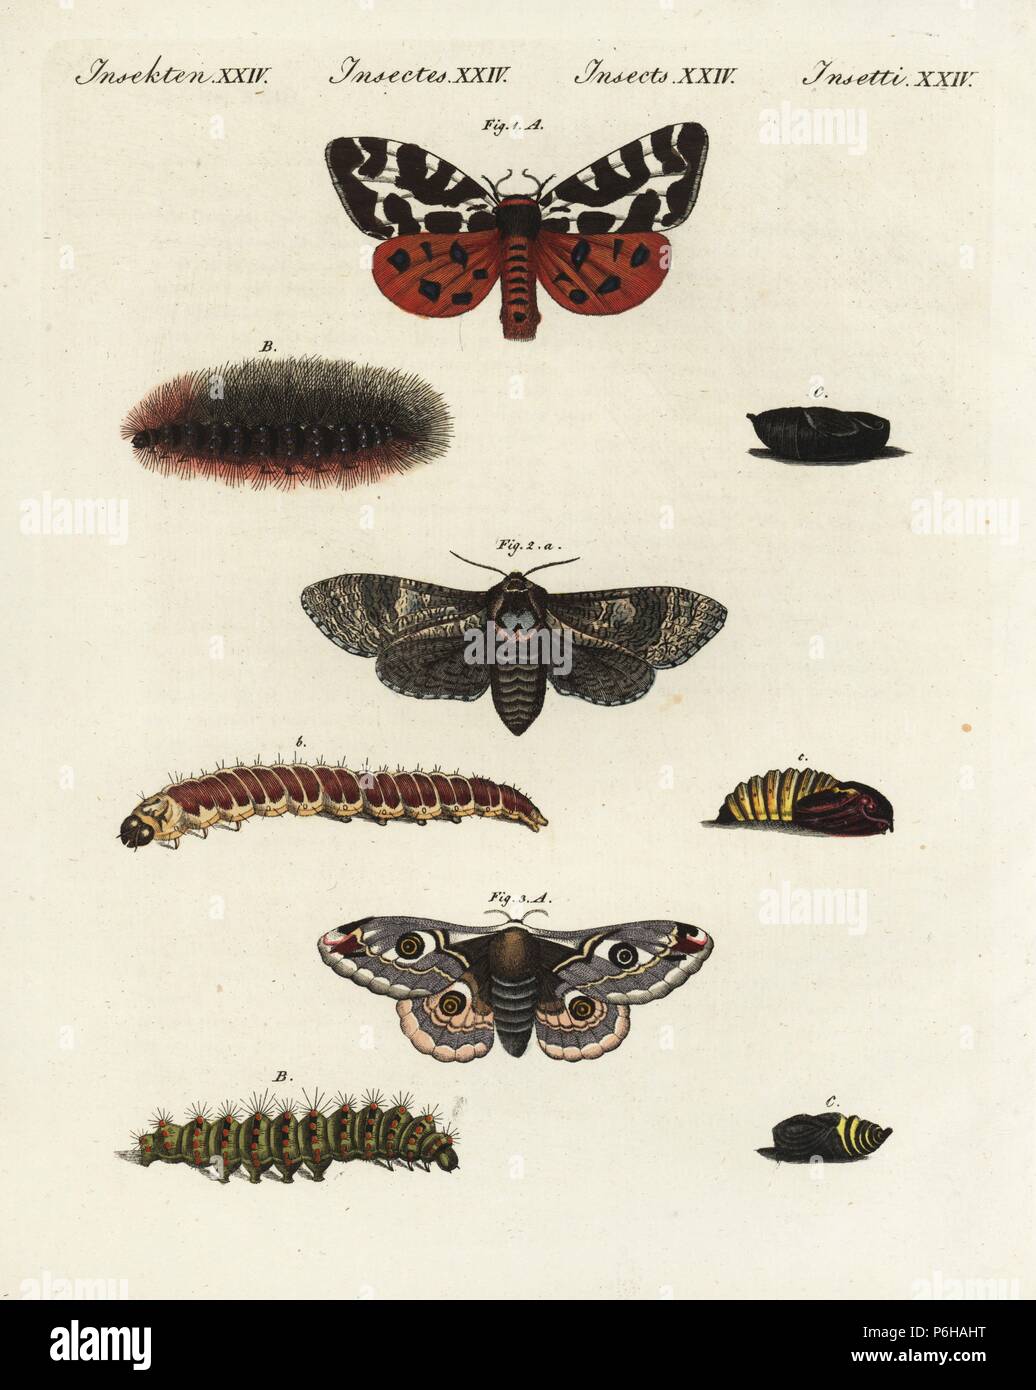 Garden tiger moth, Arctia caja 1, goat moth, Cossus cossus 2, and small emperor moth, Saturnia pavonia 3, moth, caterpillar and pupa. Handcoloured copperplate engraving from Friedrich Johann Bertuch's Bilderbuch fur Kinder (Picture Book for Children), Weimar, 1802. Stock Photo